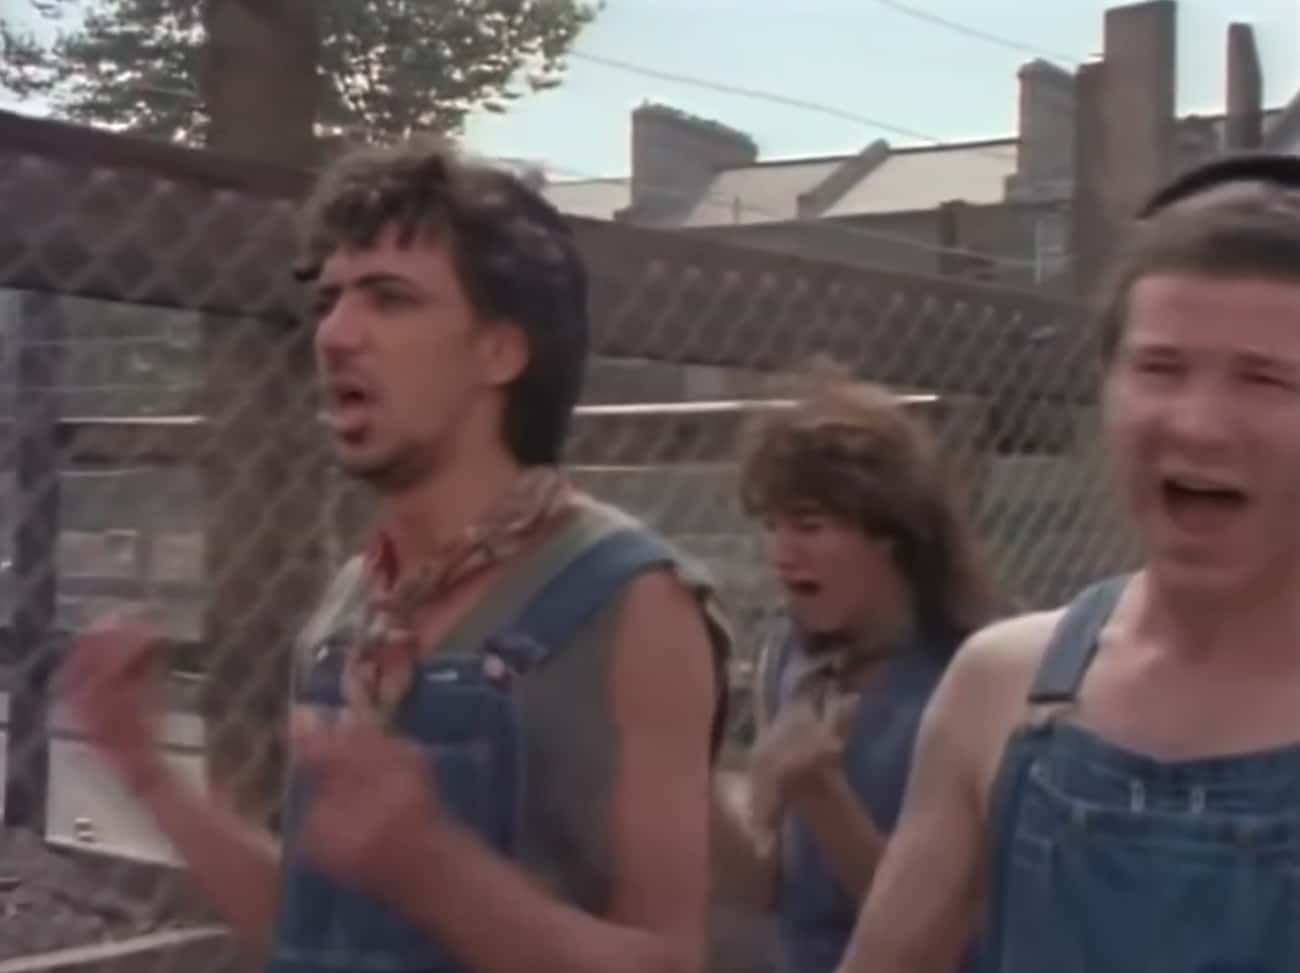 Dexys Midnight Runners ‘Worked Our Arses Off’ To Make ‘Come On Eileen’